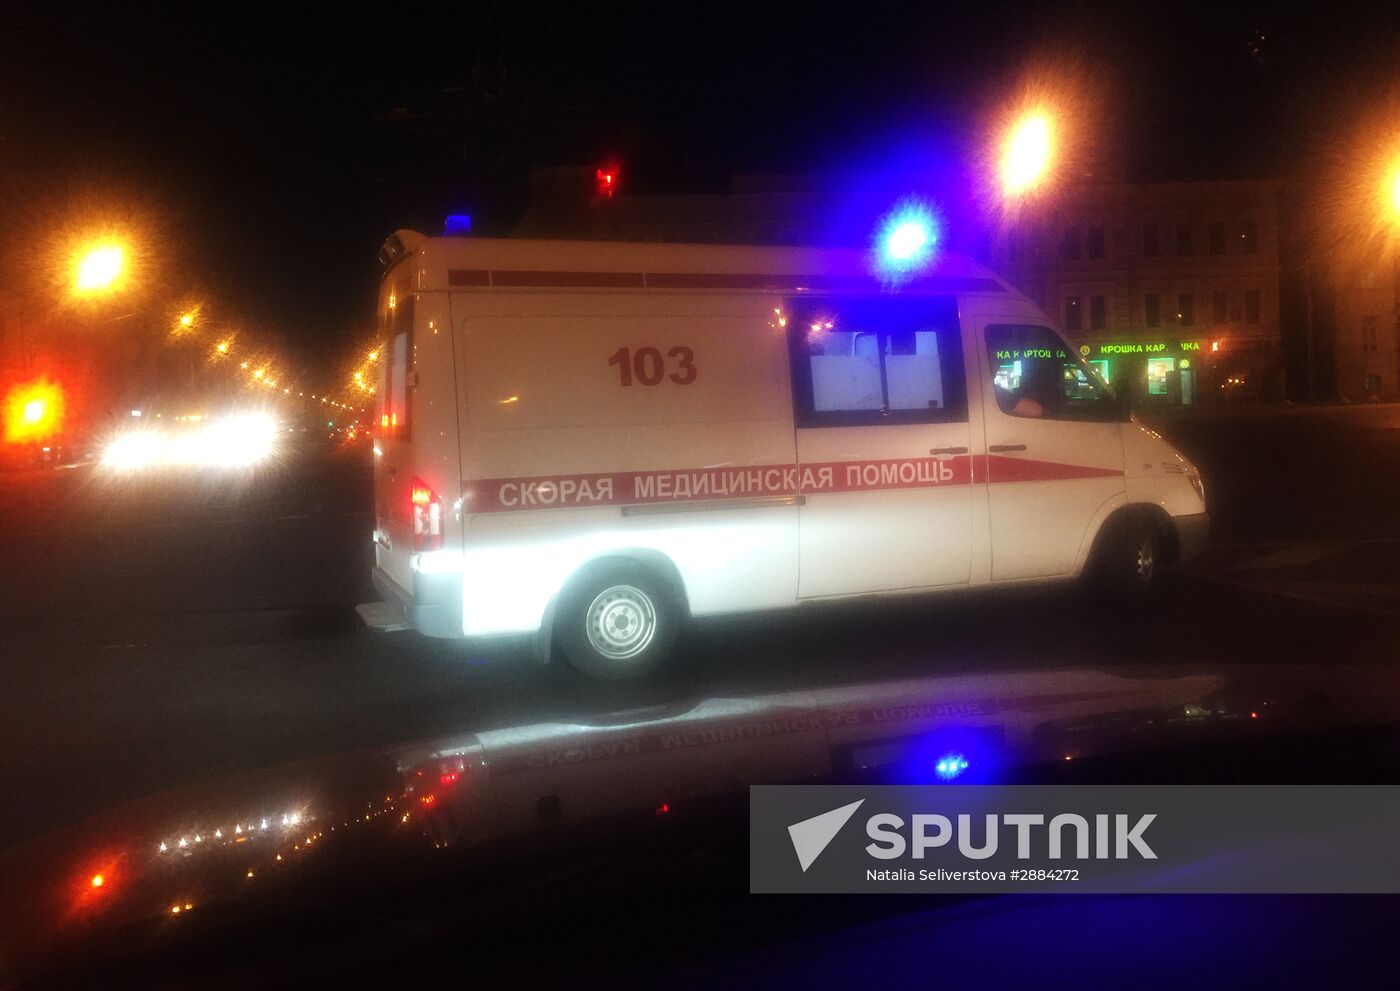 An ambulance car in Moscow